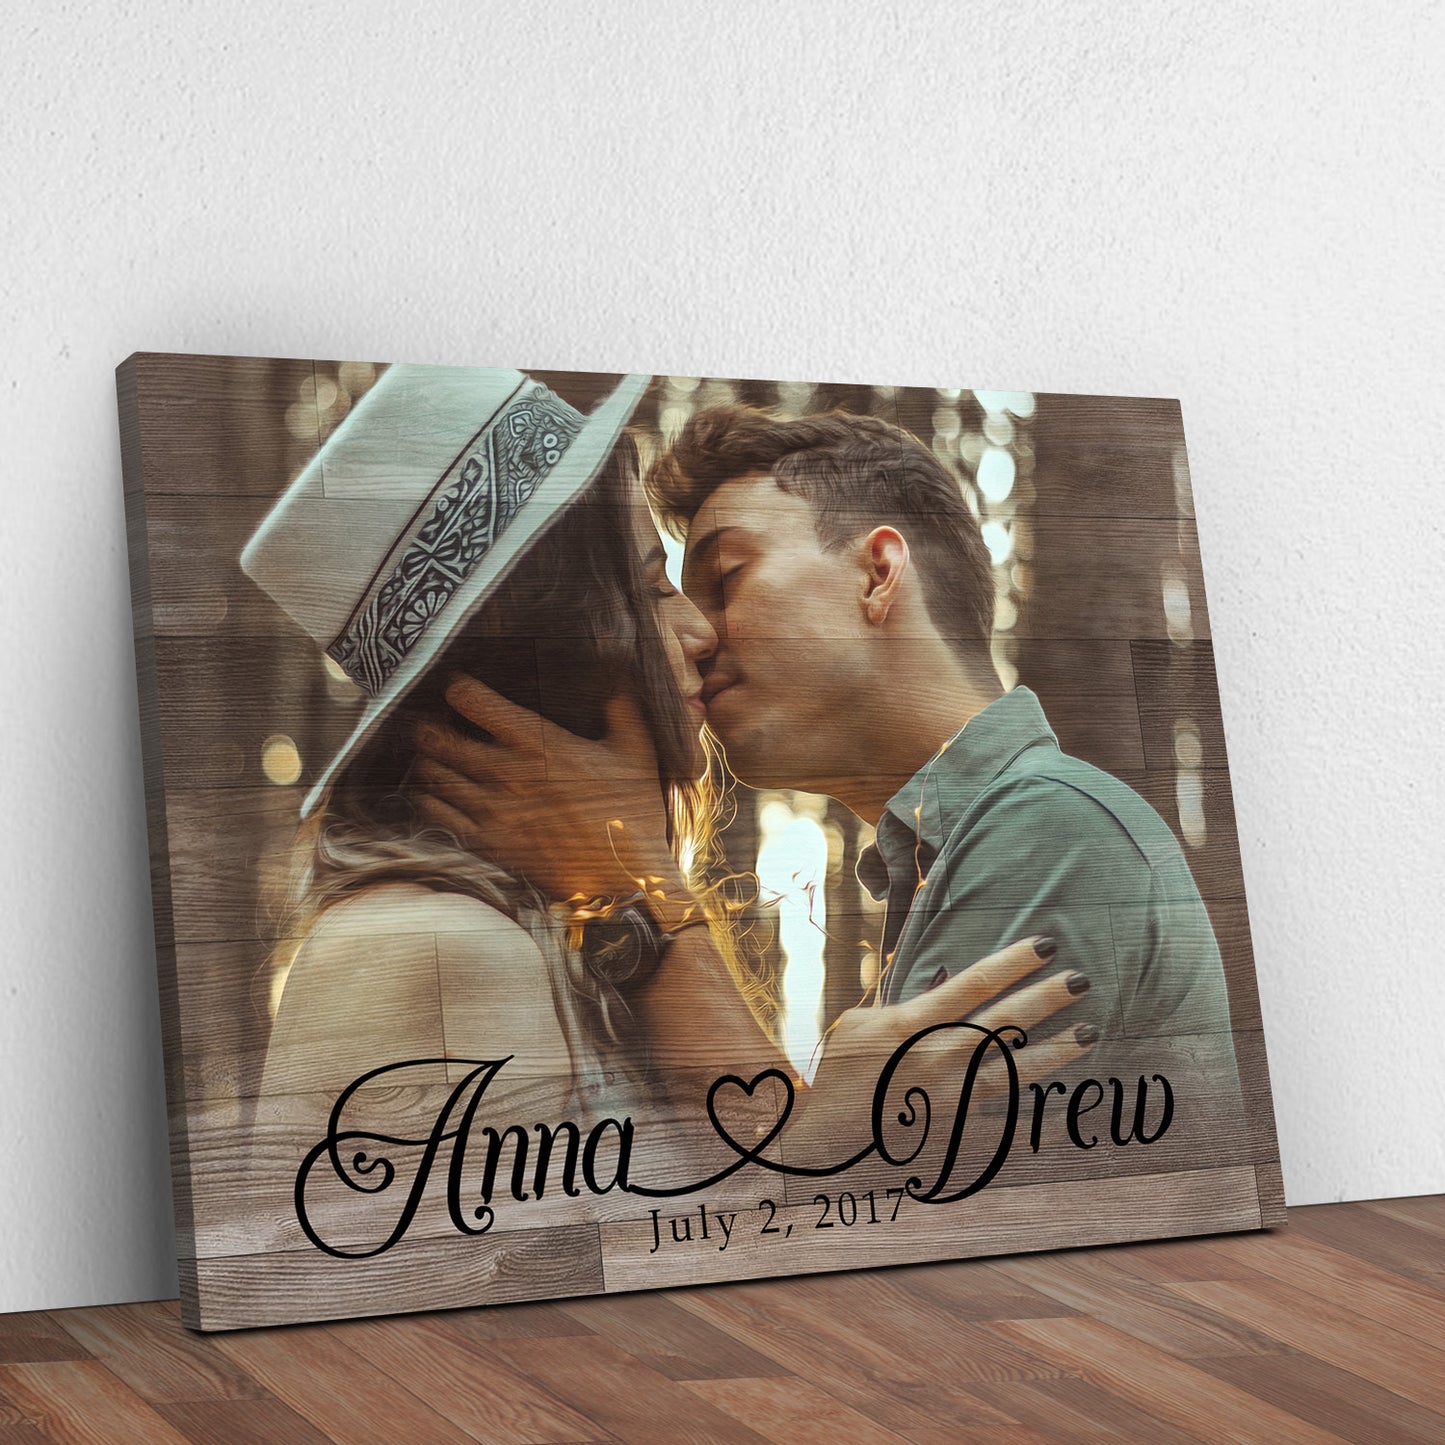 Couple Portrait Sign Style 1 - Image by Tailored Canvases